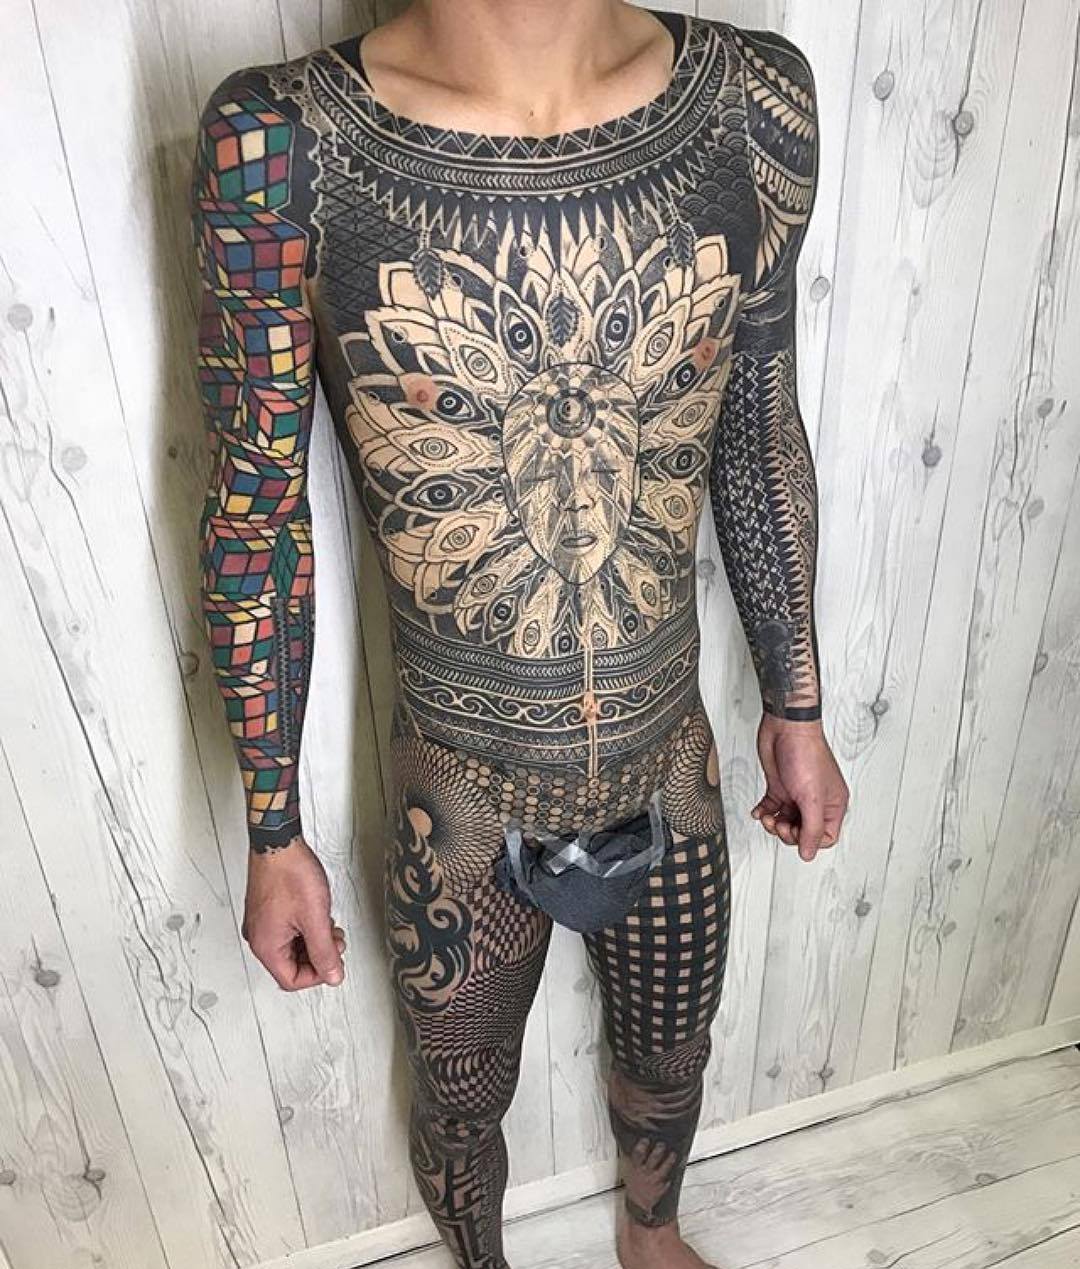 90+ Percect Full Body Tattoo Ideas Your Body Is a Canvas